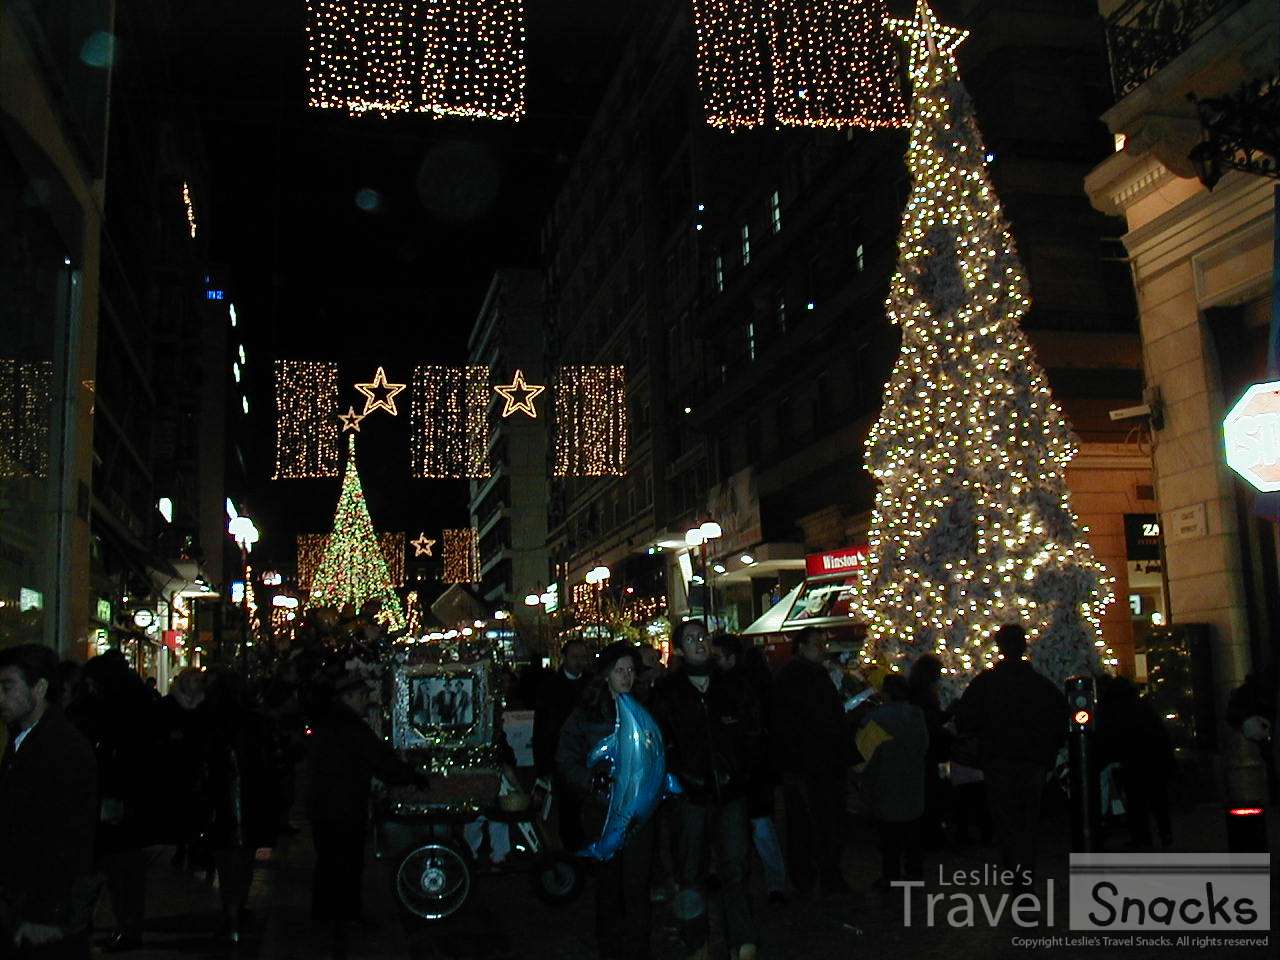 The streets of Athens are so decorated for the holidays!